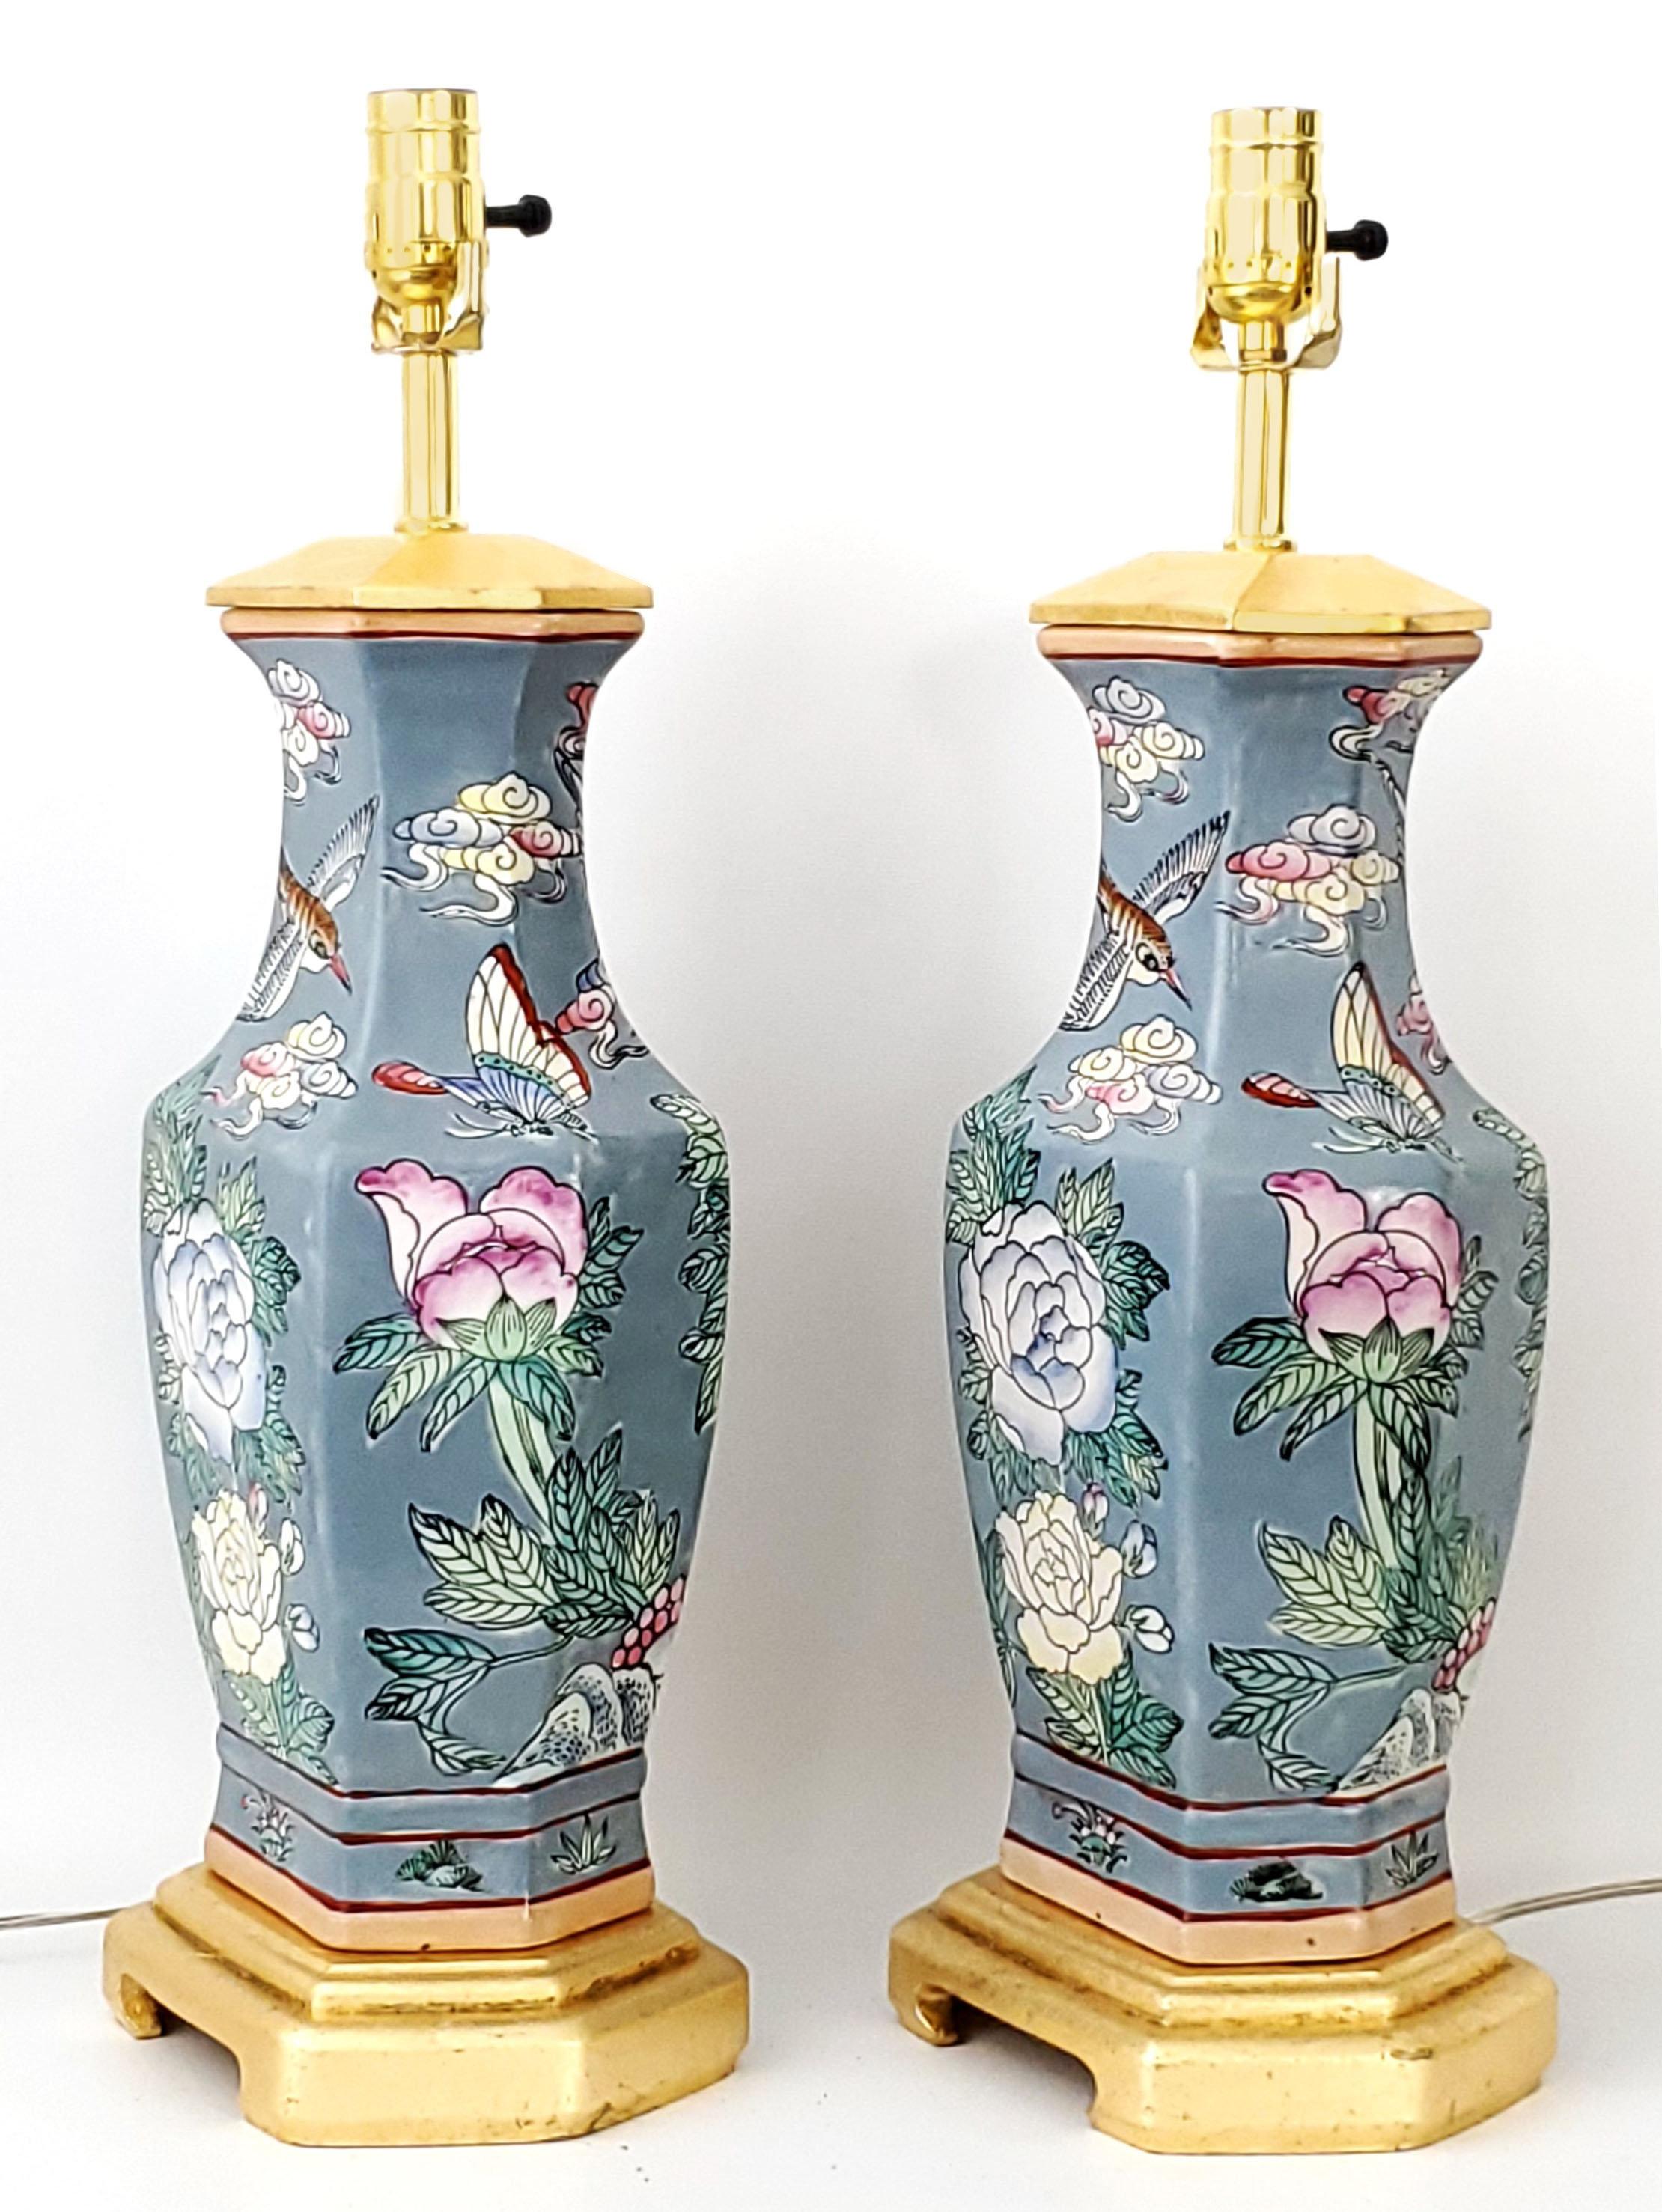 Pair of Vintage Chinese Porcelain Ceramic Table Lamps with Pink Lamp Shades For Sale 1